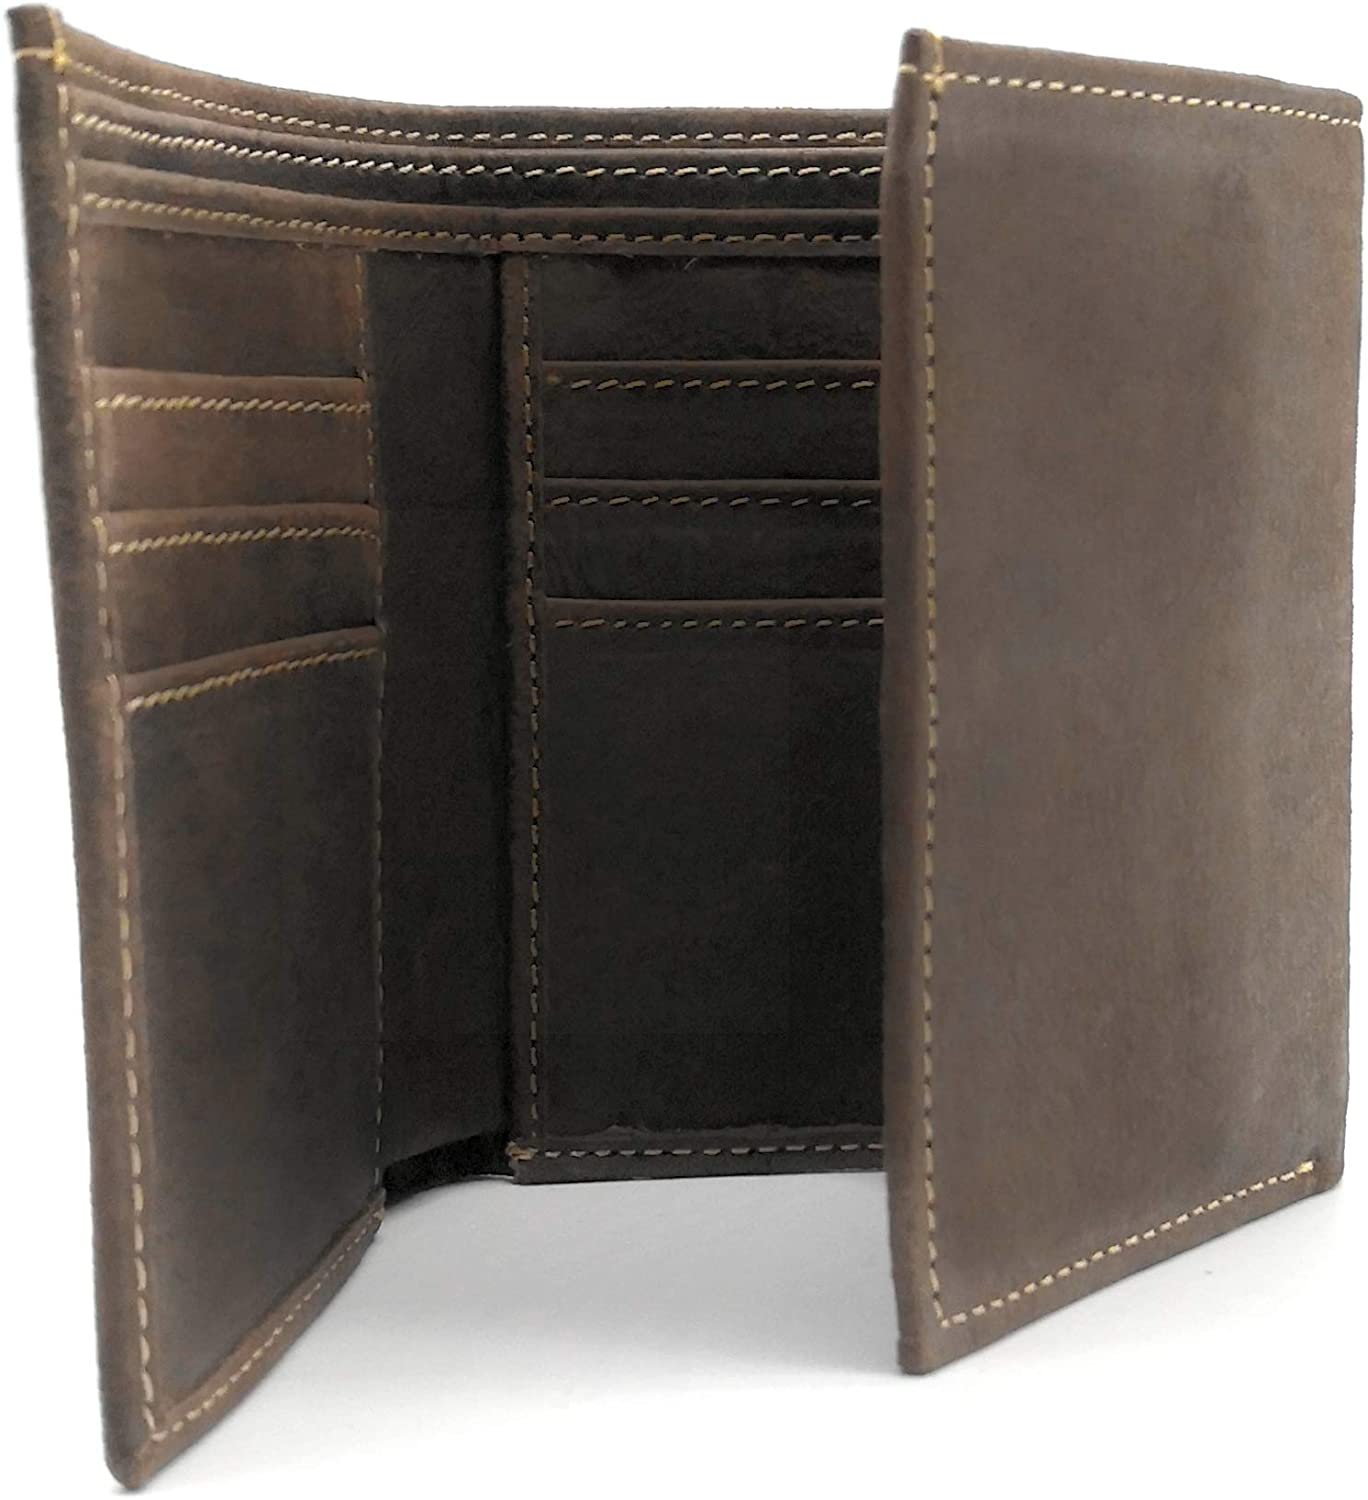 Men Genuine Leather Mens Wallet in Calf Bifold and Trifold Purses (Brown)